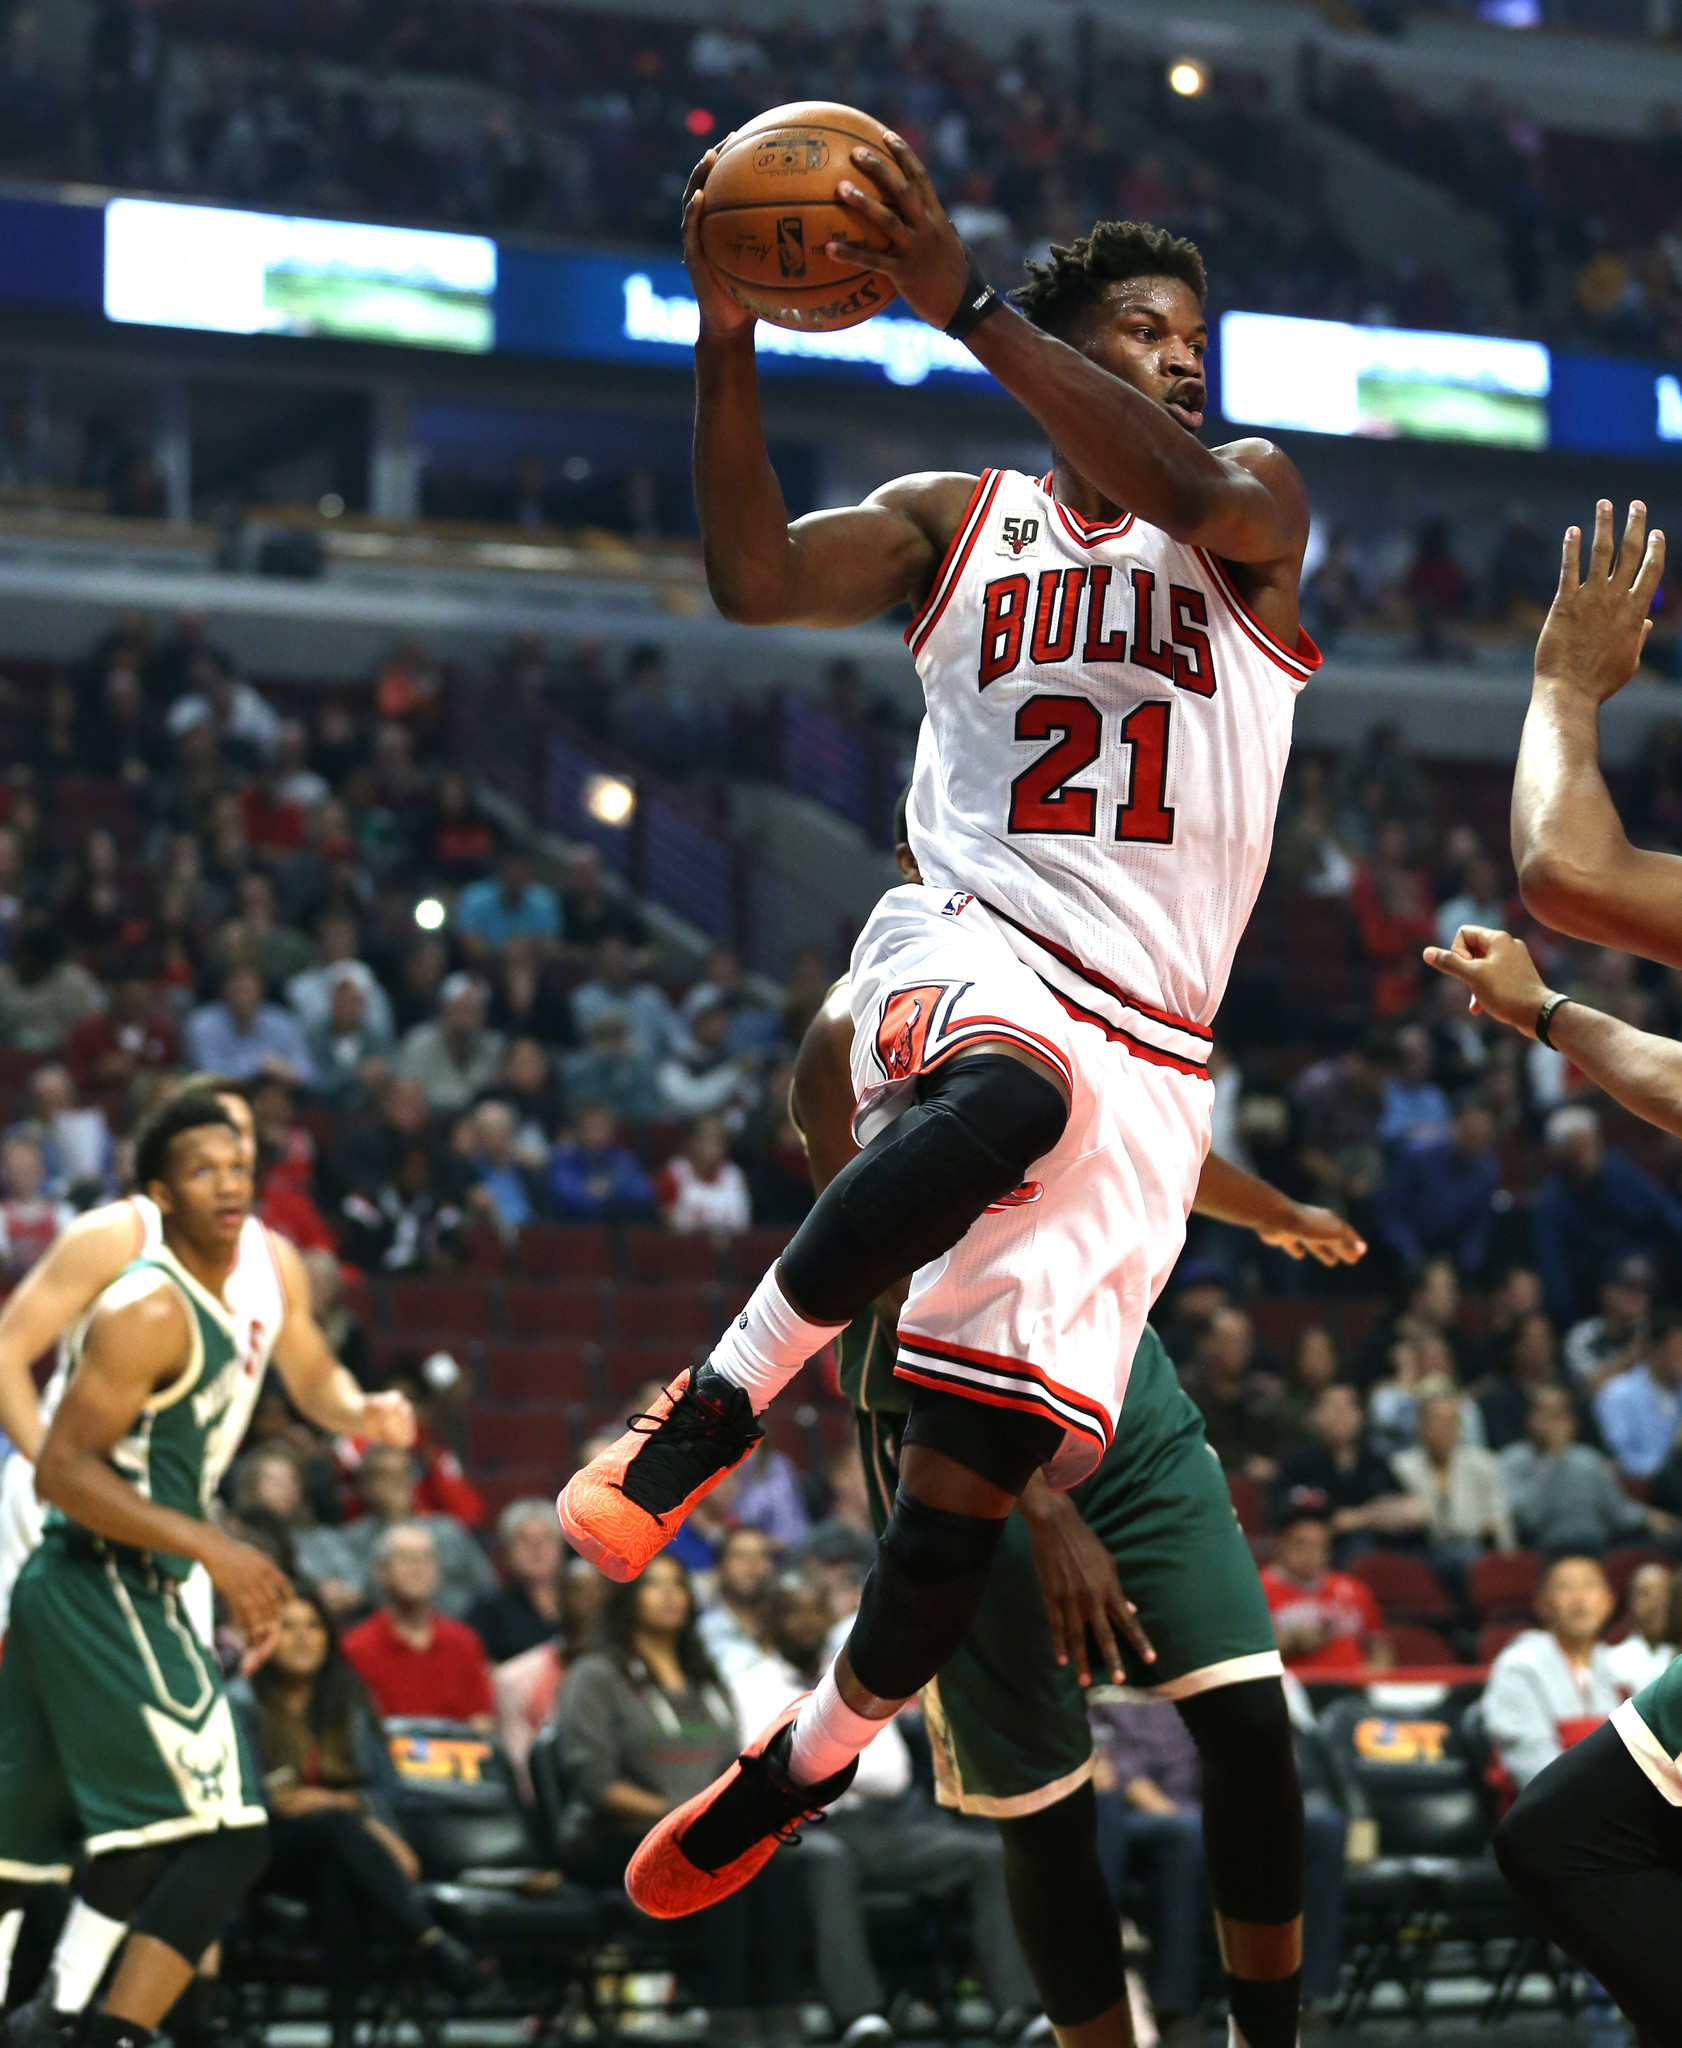 Same old Jimmy Butler, exhibition game or not - Chicago Tribune1682 x 2048